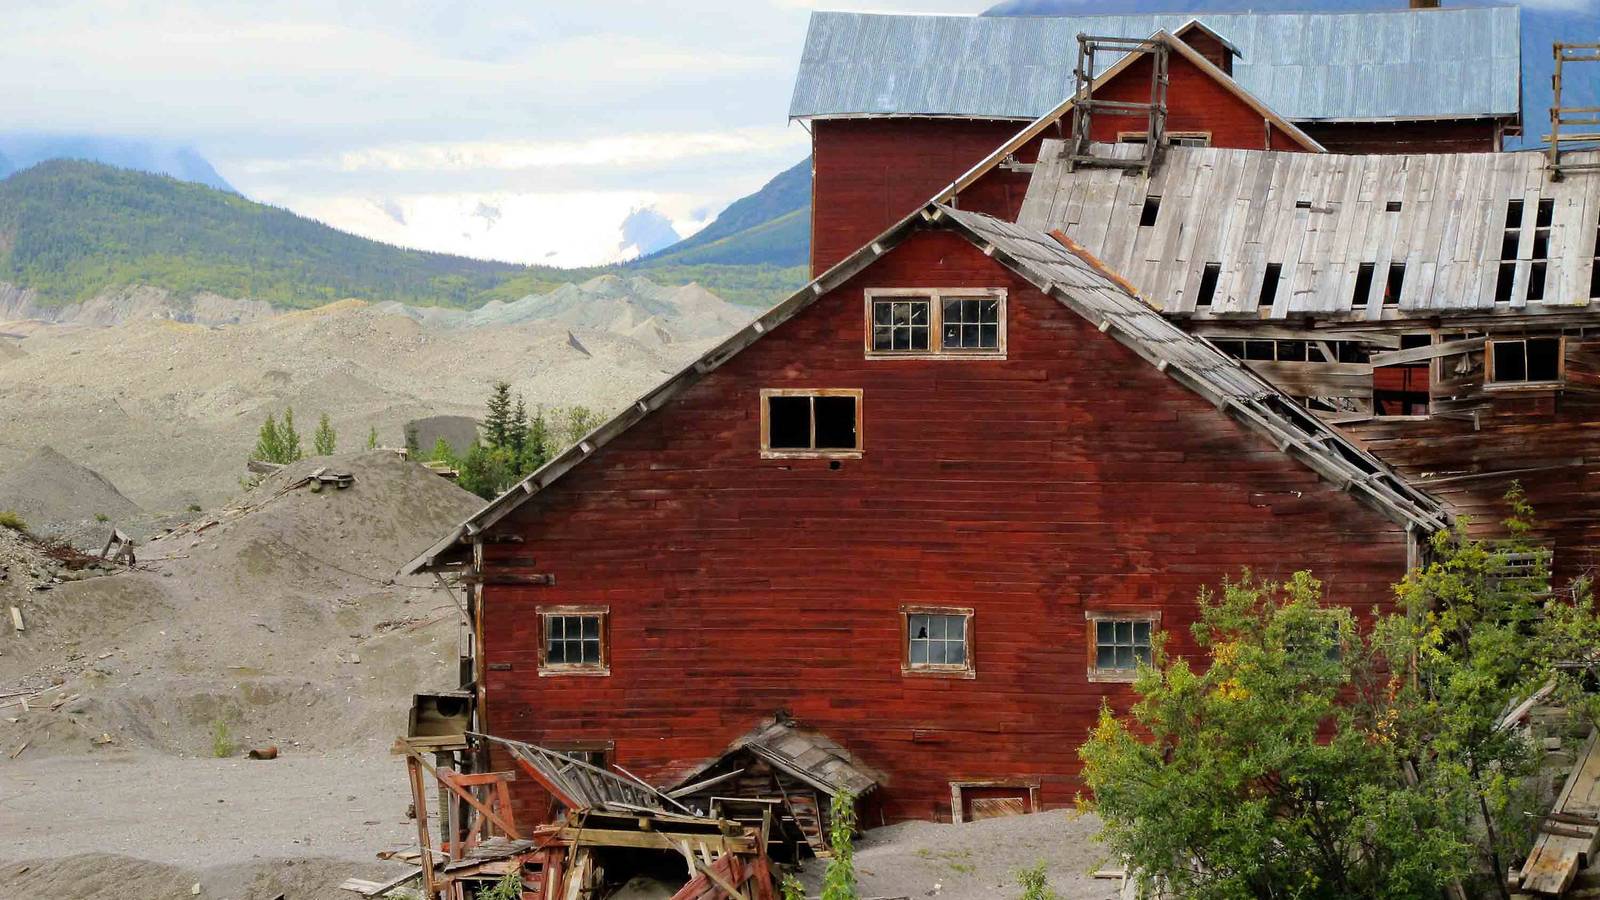 <p>Pictured above is the Kennecott Mine Mill Building at Wrangell-St. Elias National Park and Preserve in Alaska. After acquiring numerous Kennecott Mine historic structures, the Park Service decided to rehabilitate and adaptively use some for park purposes, stabilize others (like the Mill Building), and let others deteriorate naturally. </p>